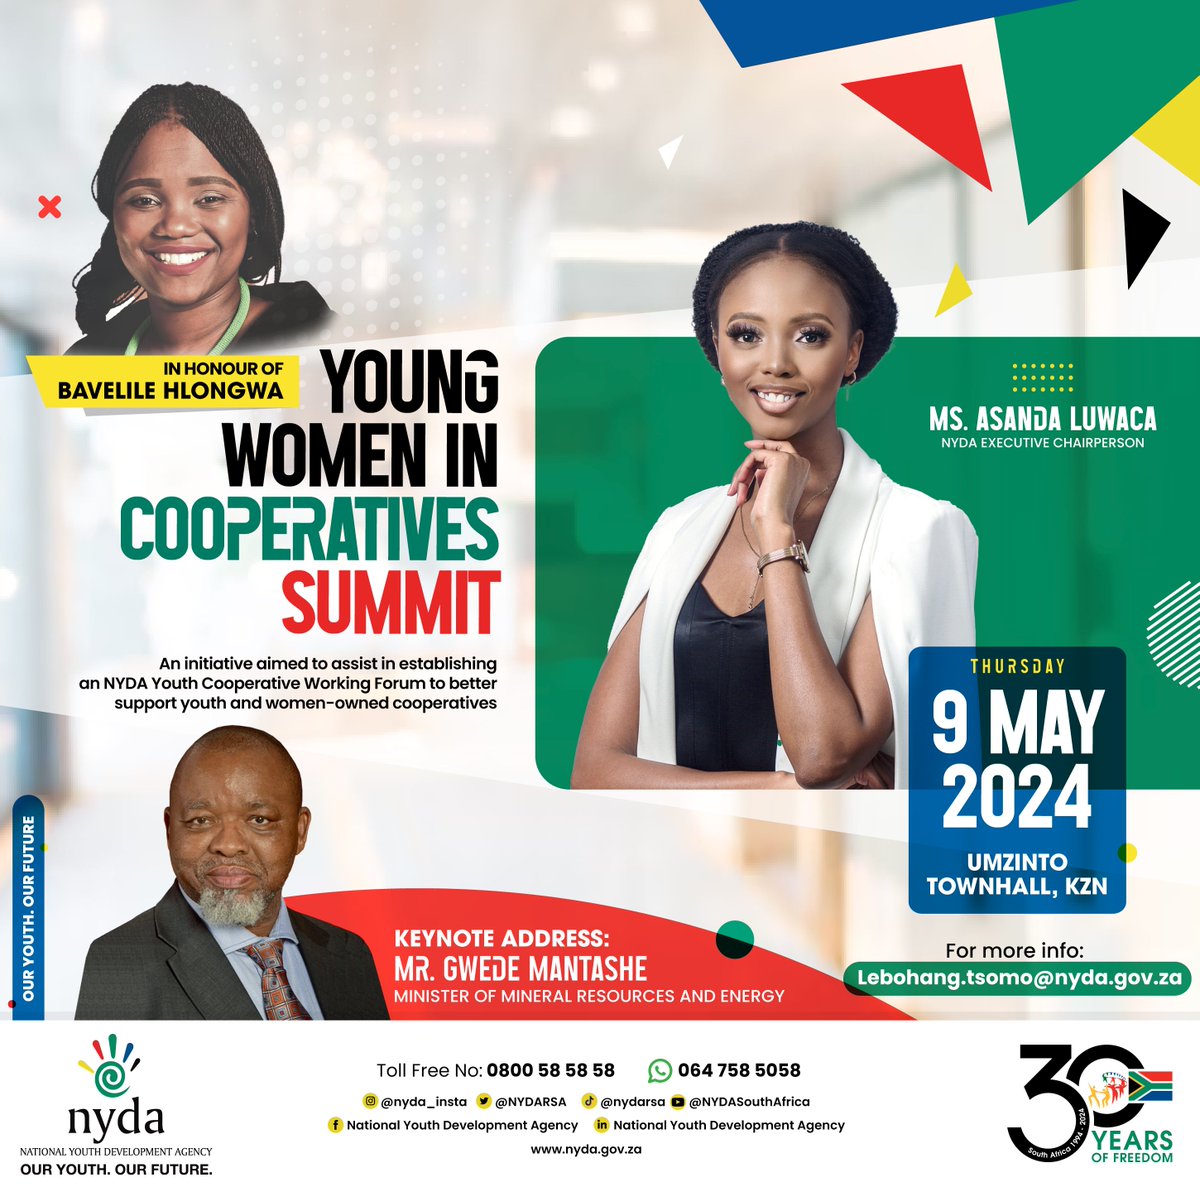 What will the youth of Umzinto gain from attending the Young Women in Cooperatives Summit? Through the summit, young women will gain access to information about available resources, funding opportunities, and support services for cooperatives. They will be connected with…